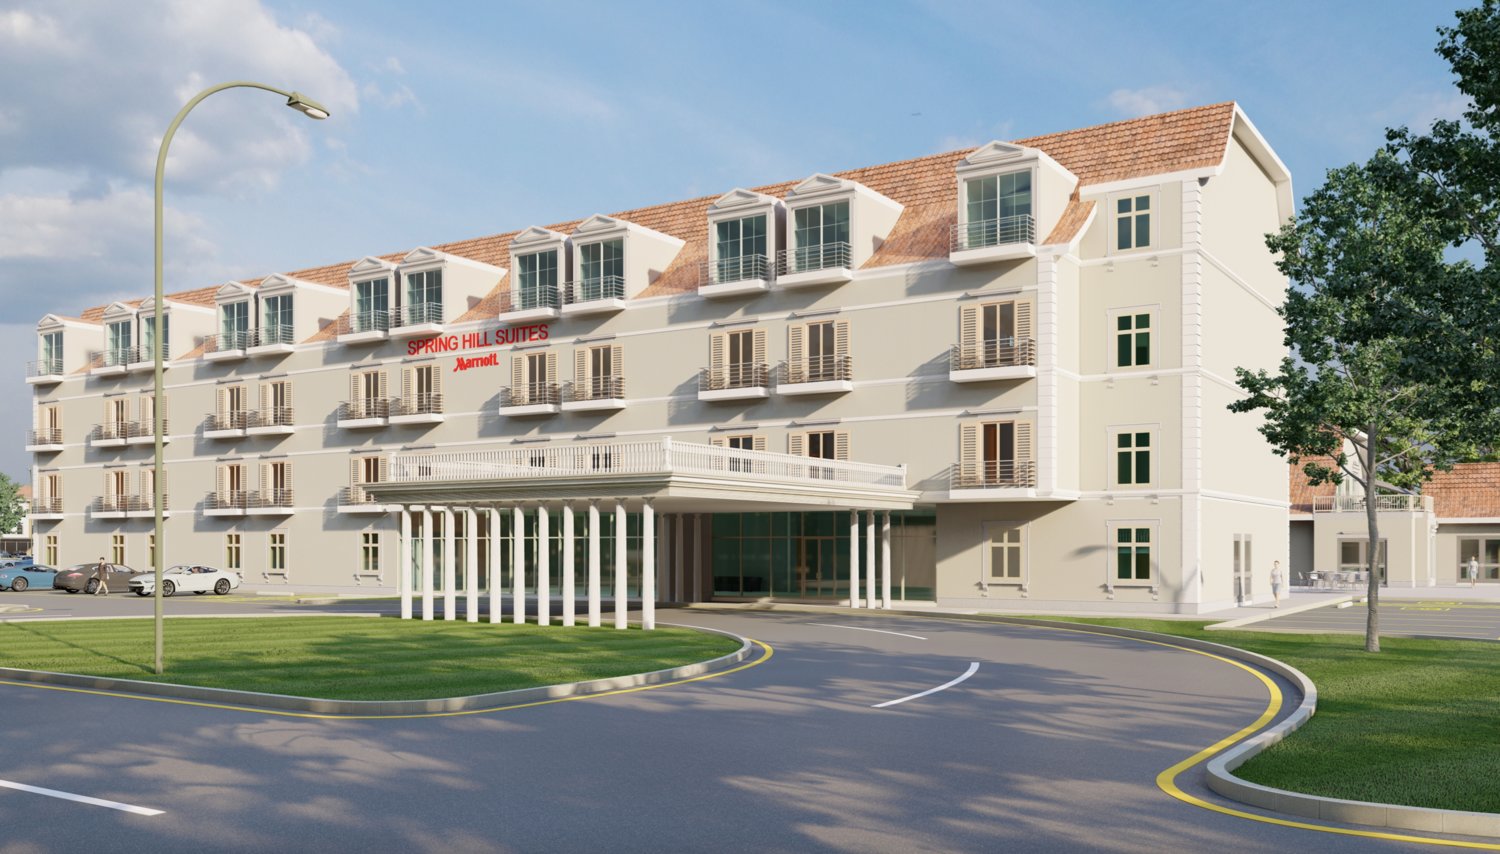 A rendering of the Springhill Suites Hotel, one of the two hotels coming
to Gluckstadt as part of the ongoing Germantown Village project, with
phase 1 of the development set to be completed this year.